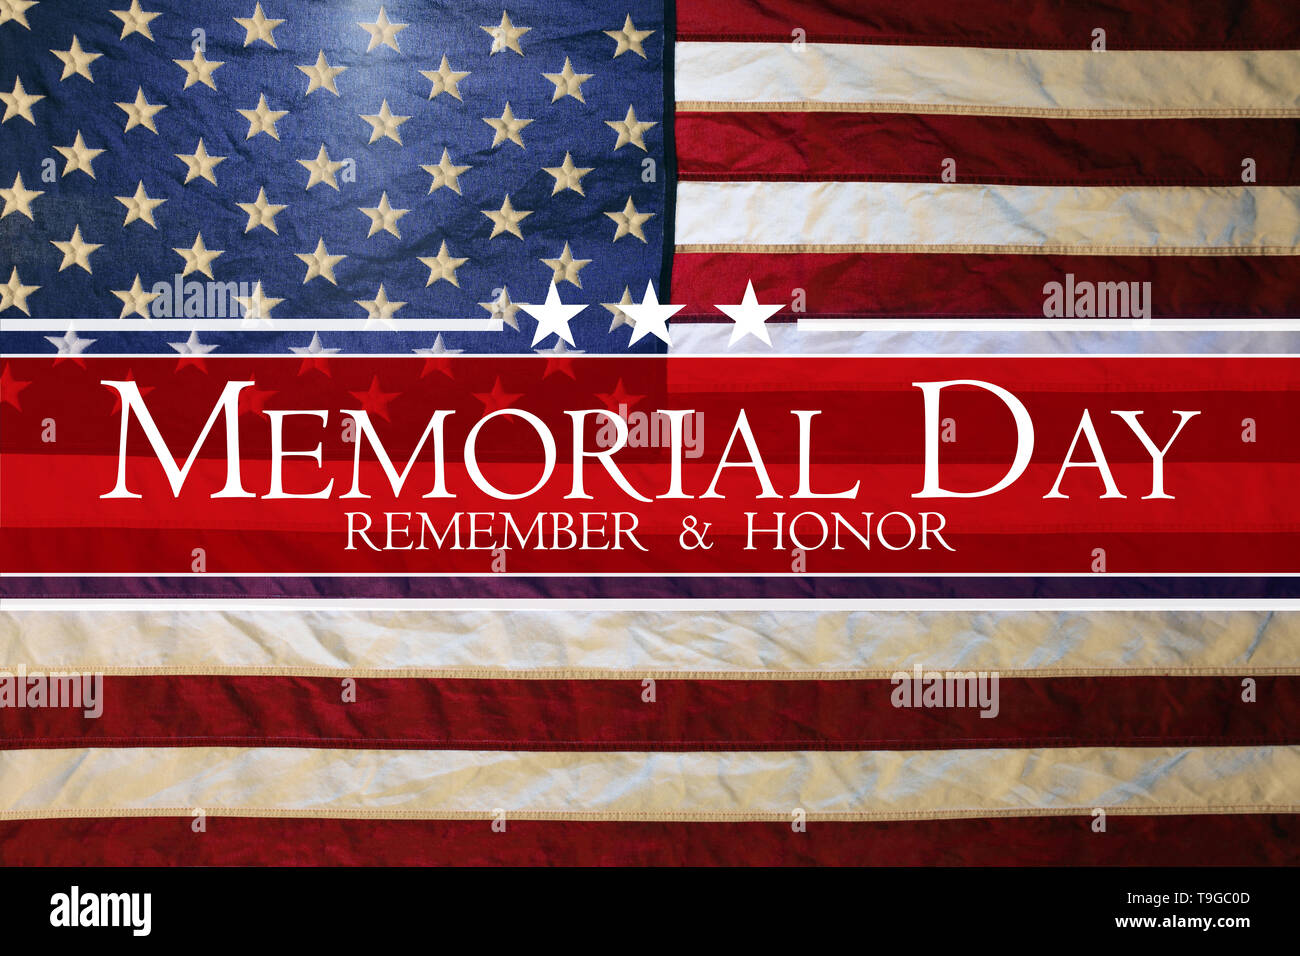 American flag Memorial day background Stock Photo